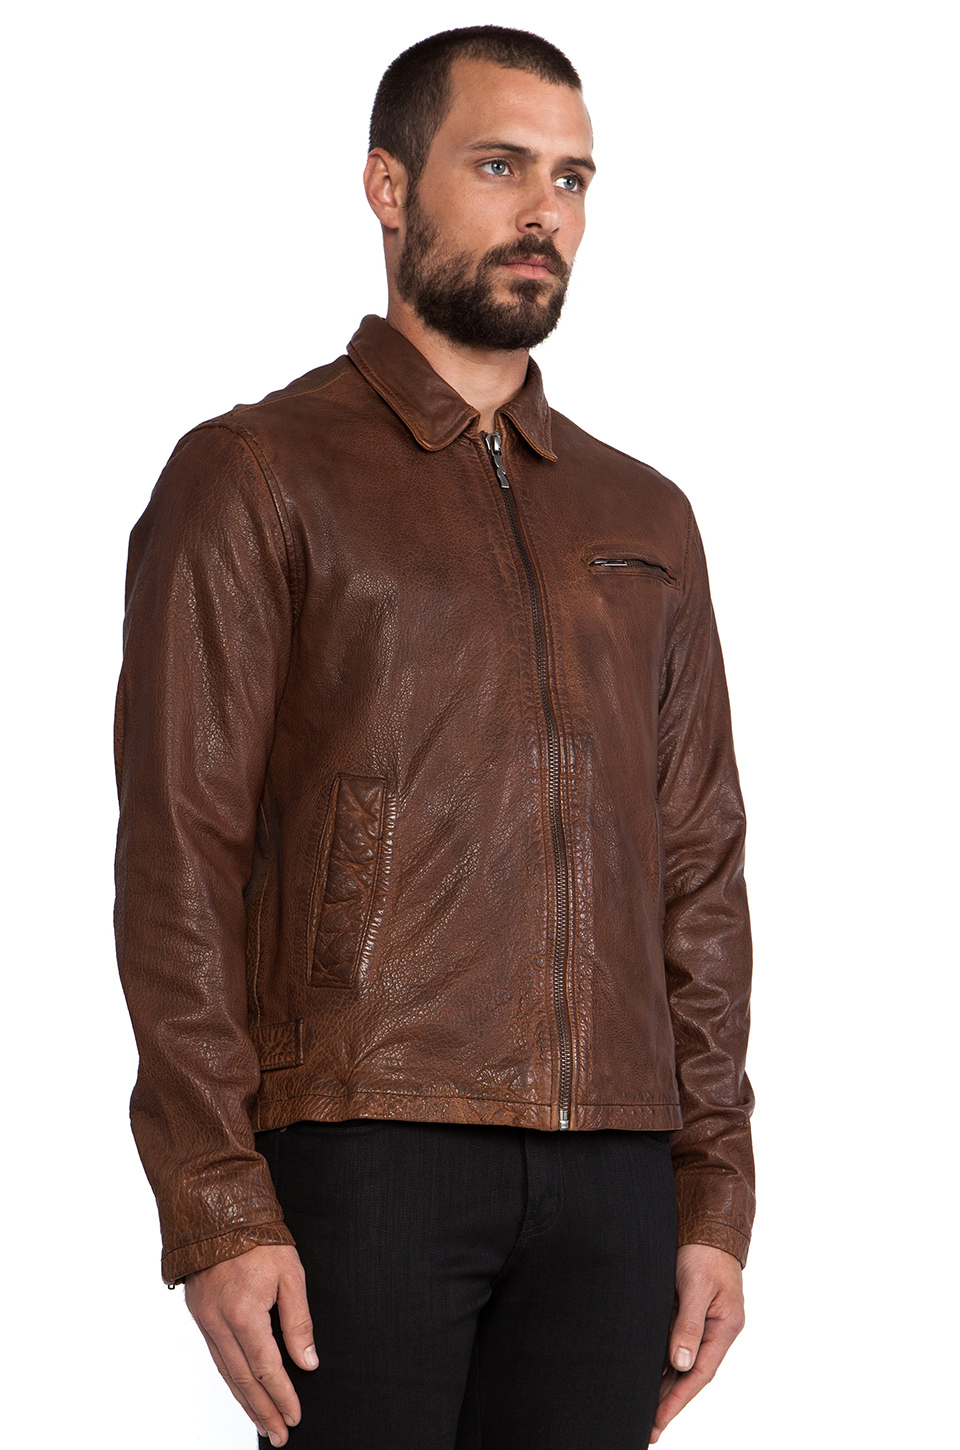 Lyst - Nudie Jeans Ervin 50s Leather Jacket in Brown for Men